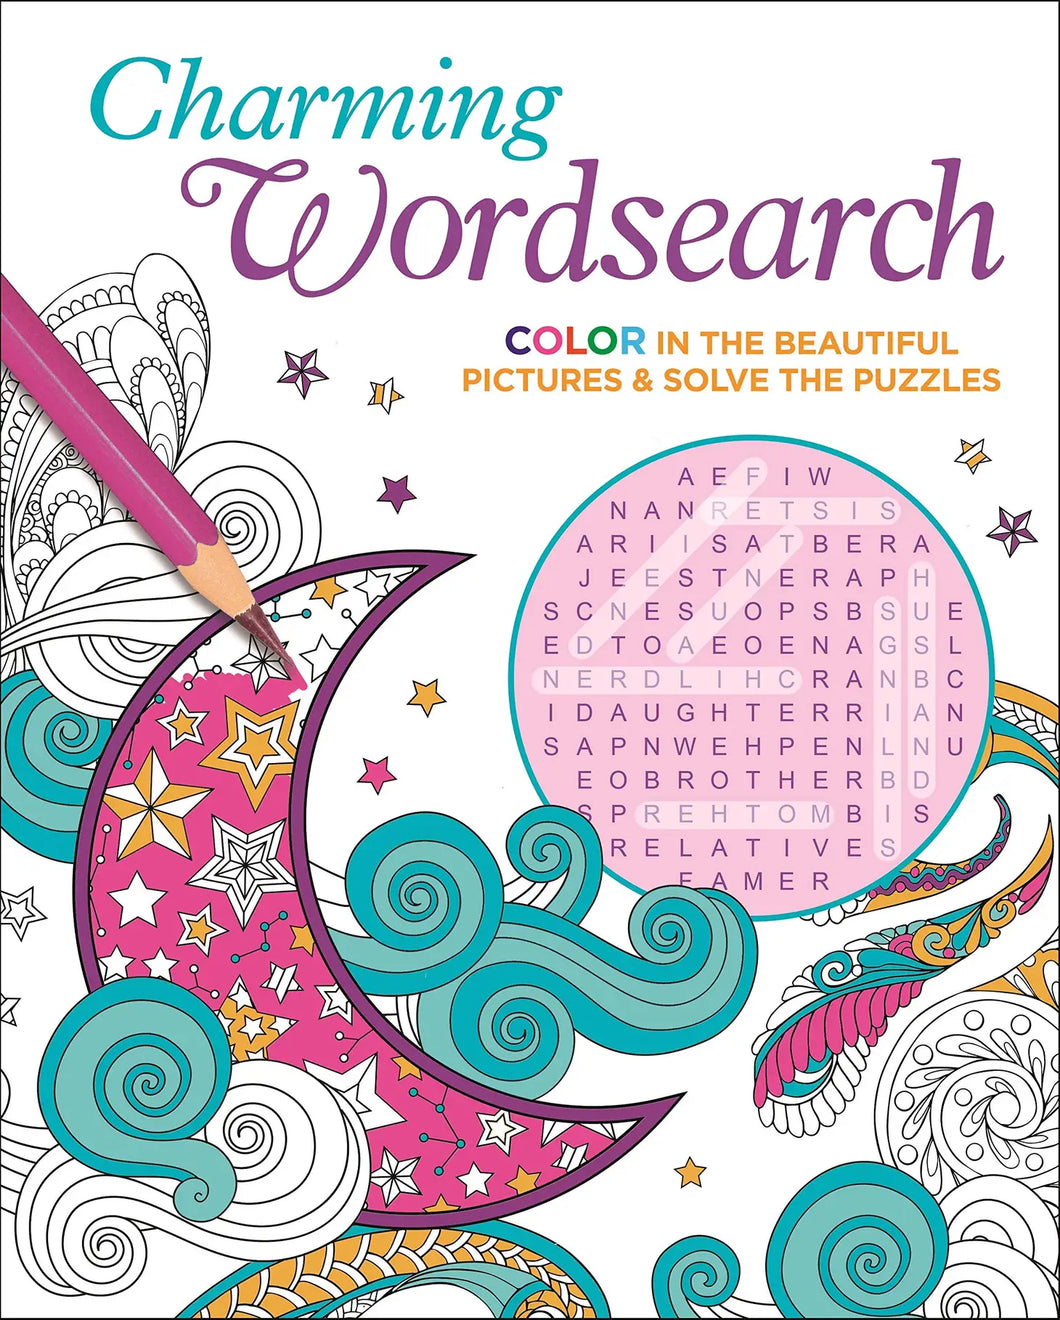 Charming Wordsearch and Coloring Book